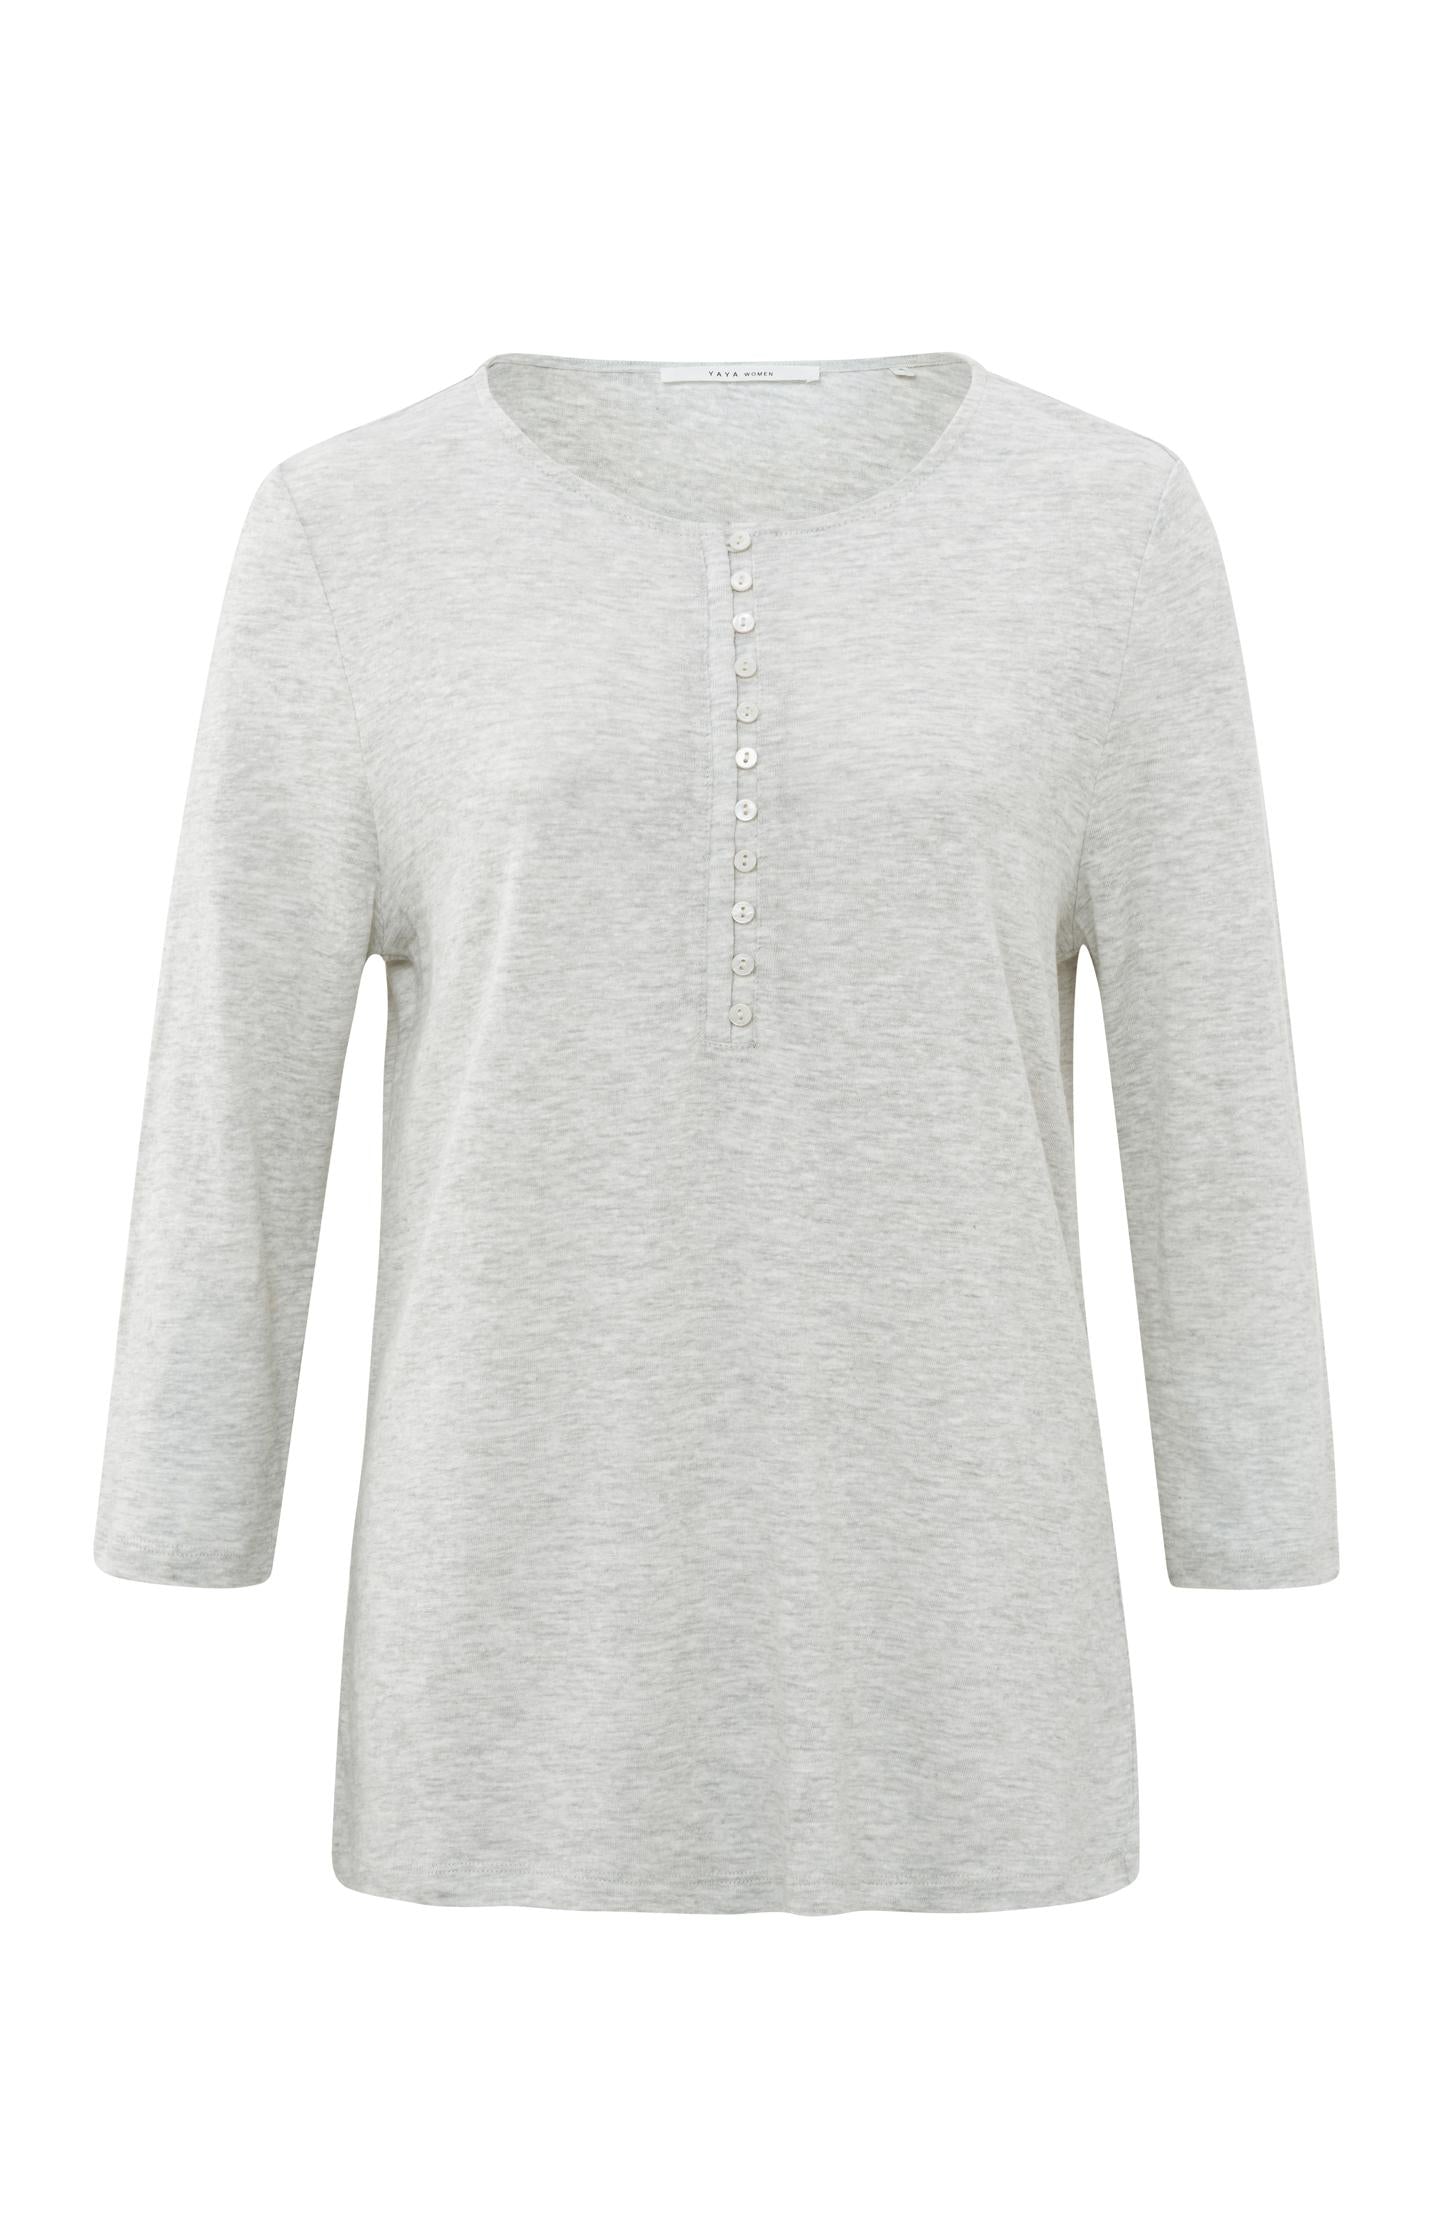 Shirt with 3/4 sleeves and round neck - Type: product